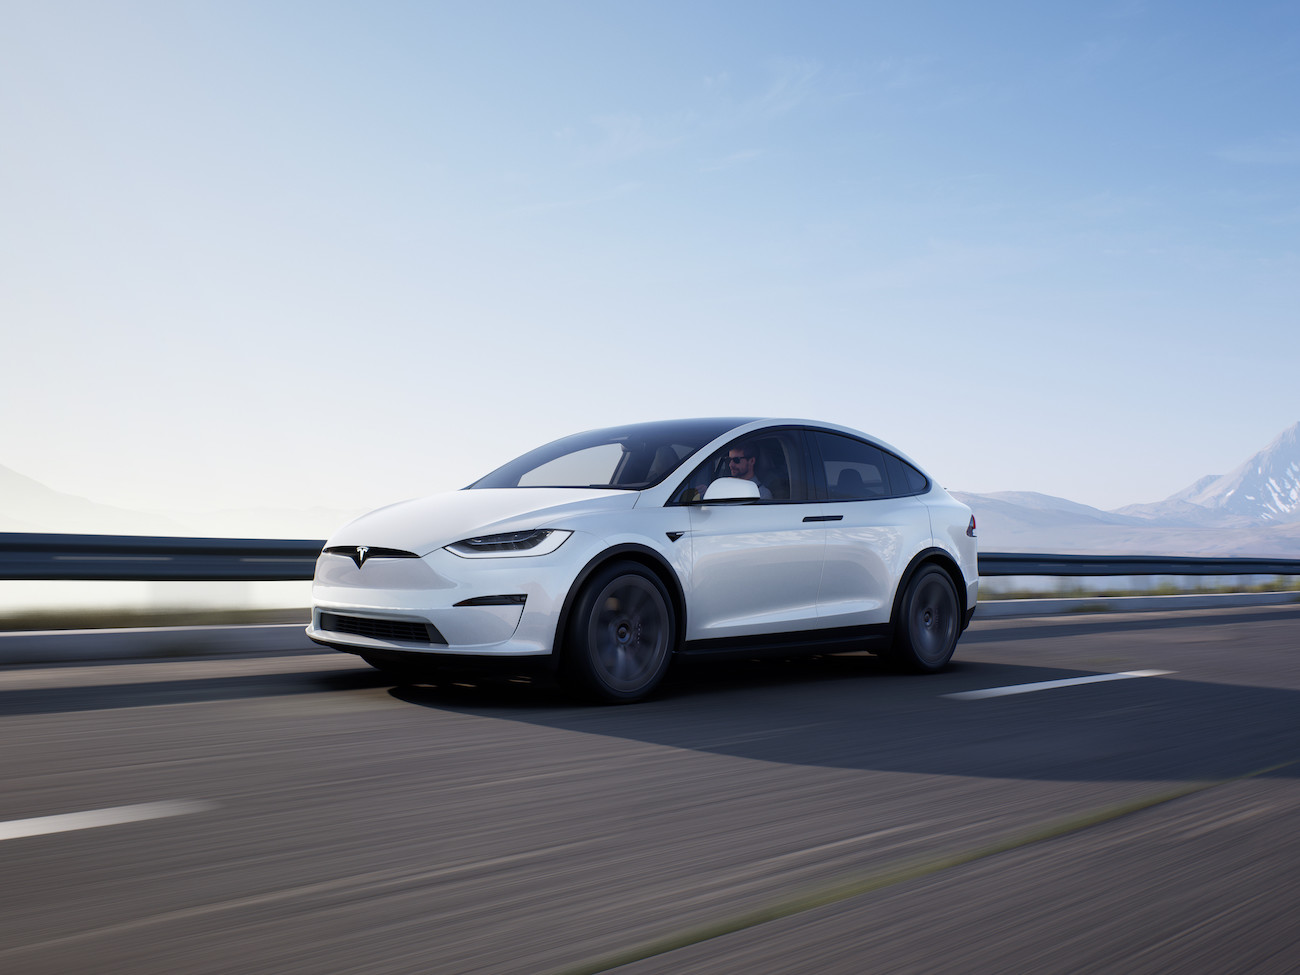 A white Tesla Model X driving along a road. Tesla sales data for the Model X reveal it's not the least popular model.